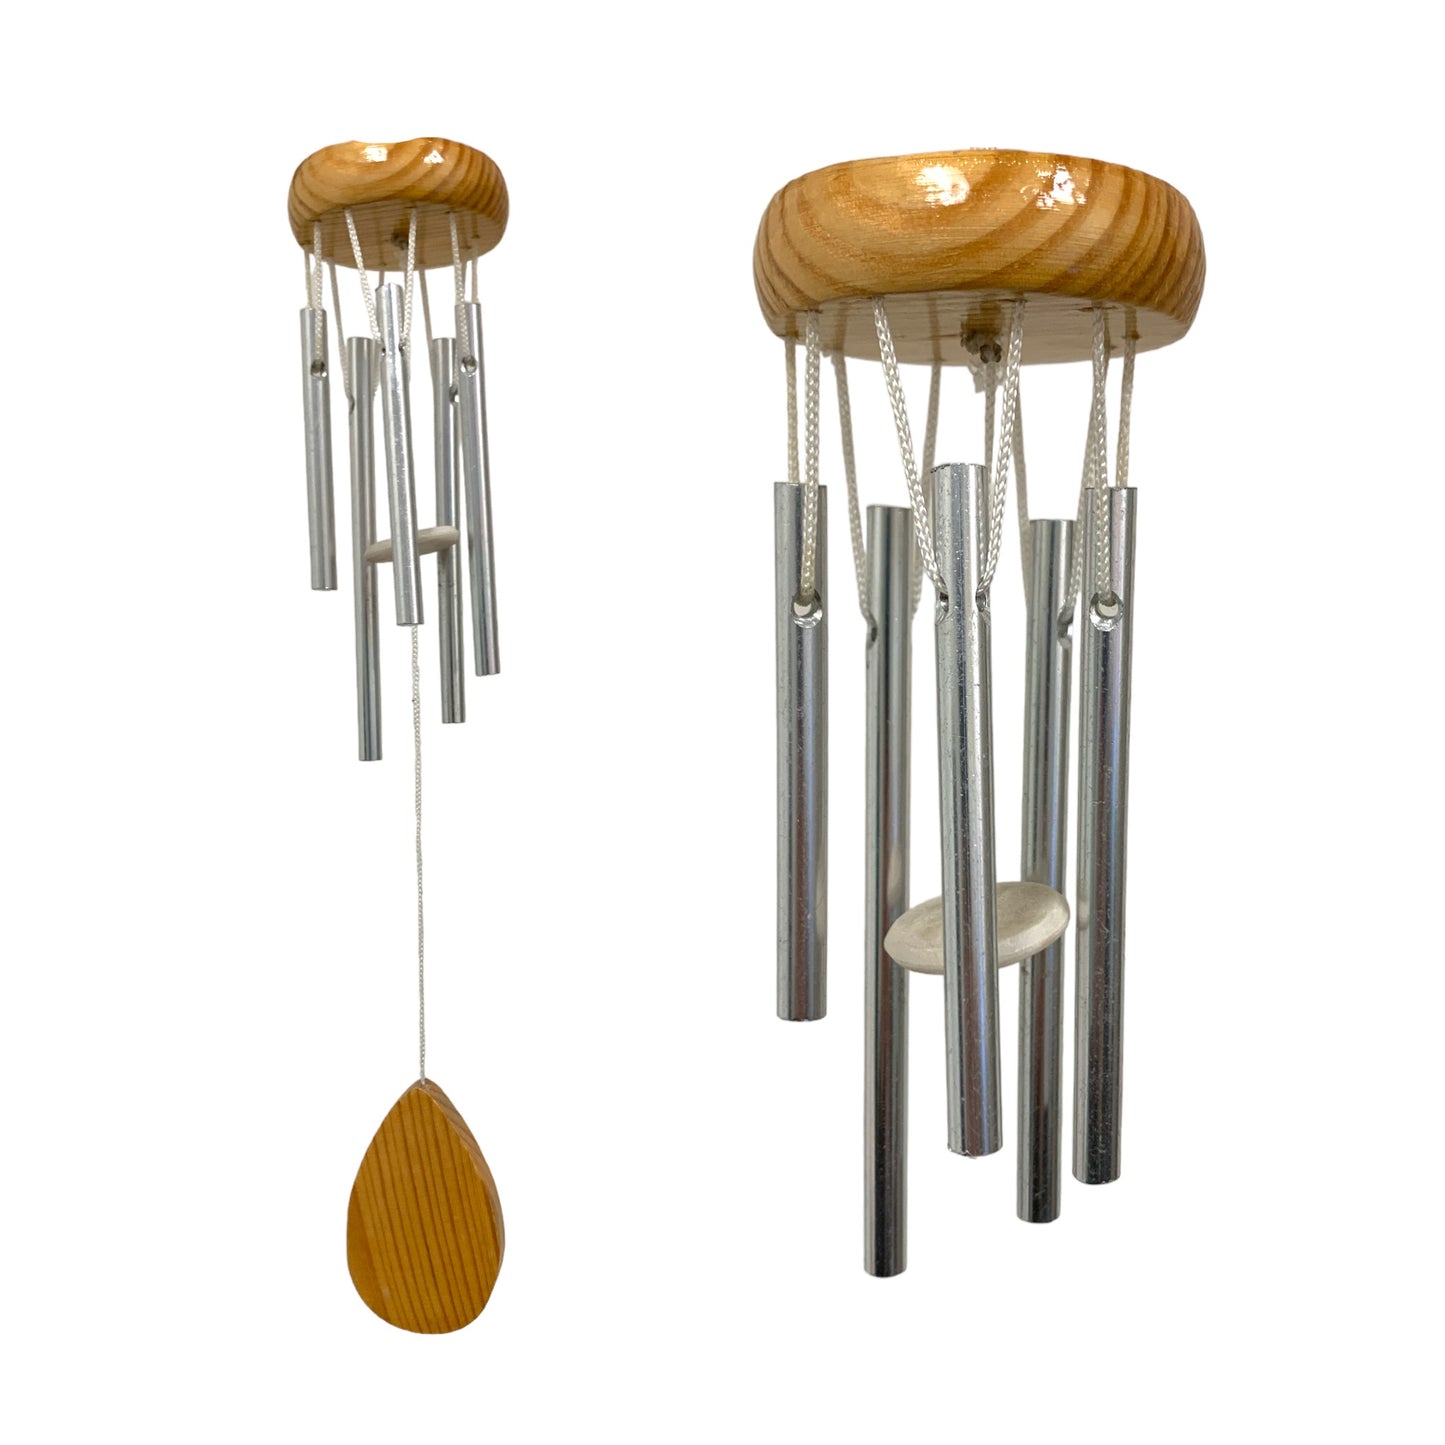 SILVER METAL AND WOOD - 13 INCH - SMALL WIND CHIME